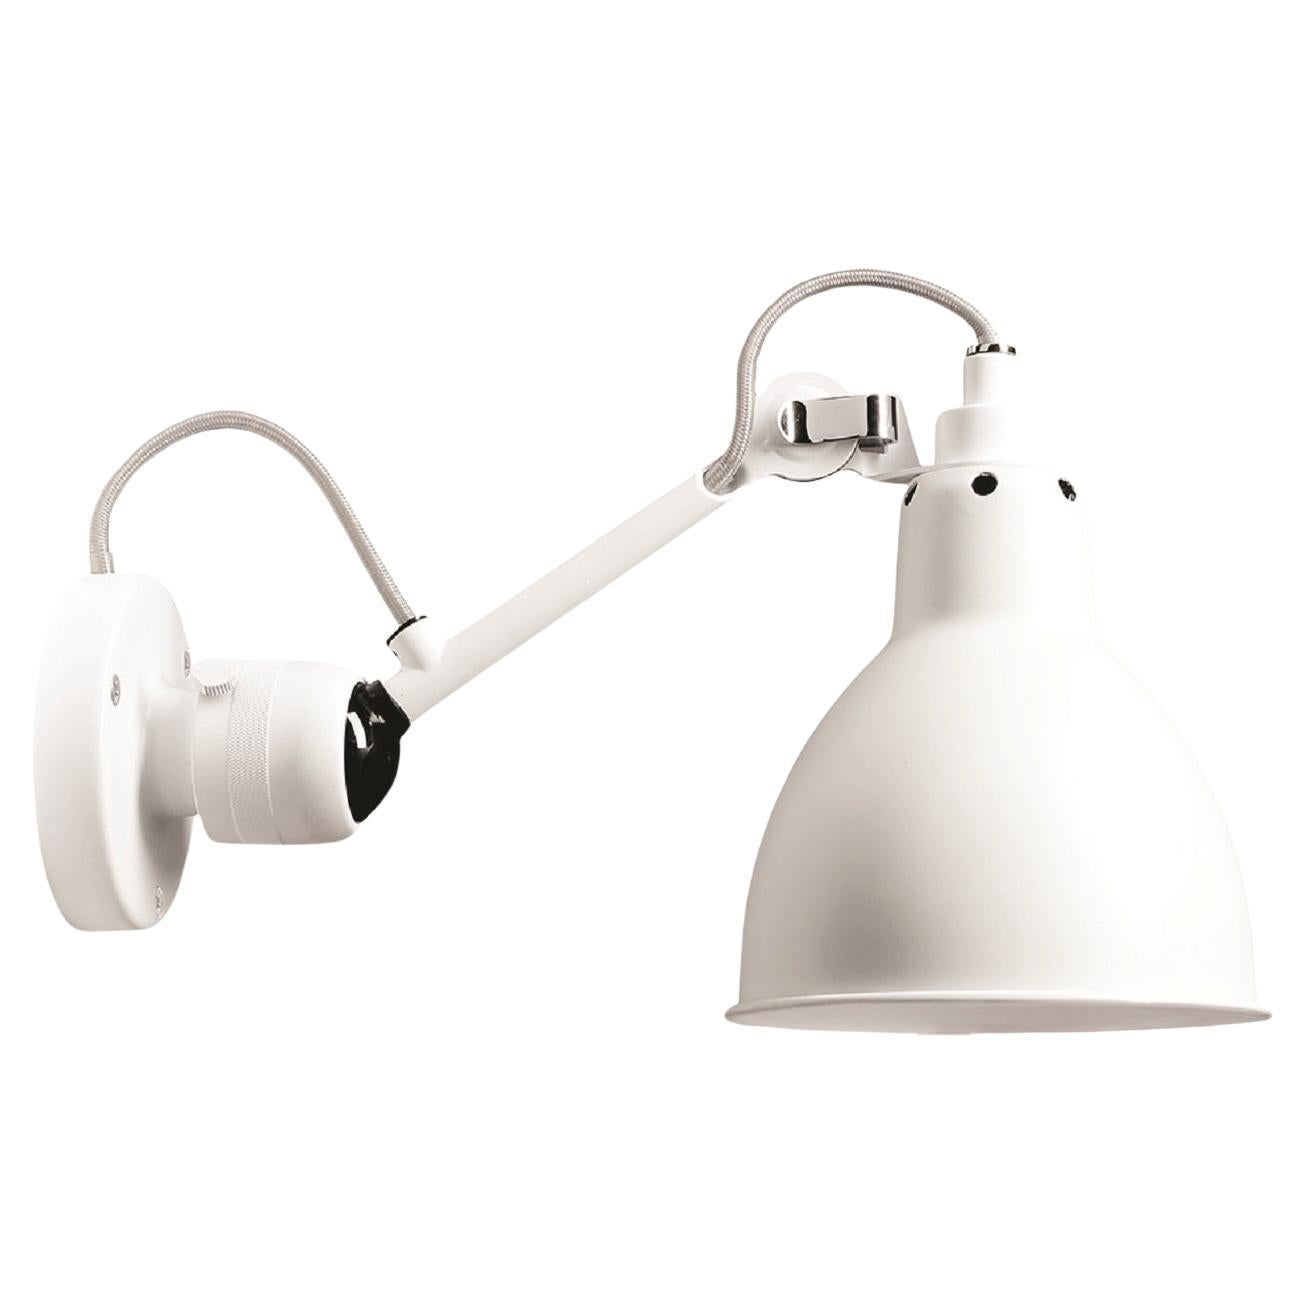 DCW Editions La Lampe Gras N°304 Wall Lamp in White Arm and White Shade For Sale